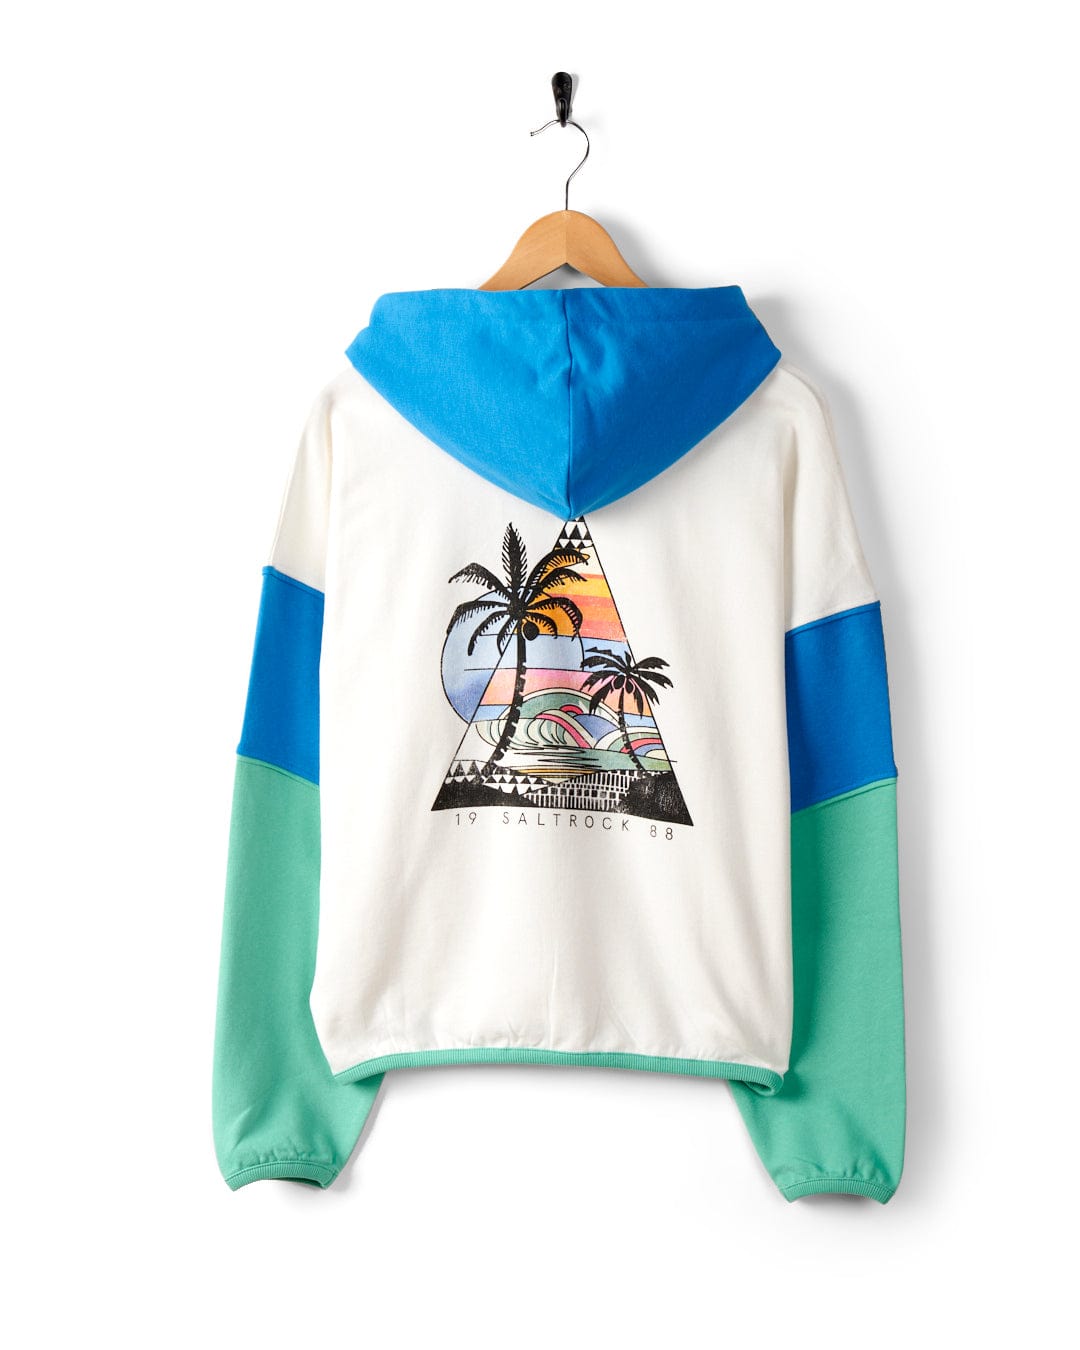 A white hoodie on a hanger, featuring a back design of Palm Beach graphics with palm trees, a sunset, and waves. The text "19 SAILROCK 88" is displayed beneath the graphic. Crafted from 100% cotton, it also features Saltrock branding for an authentic touch. This is the Geo Beach - Womens Pop Hoodie - White by Saltrock.